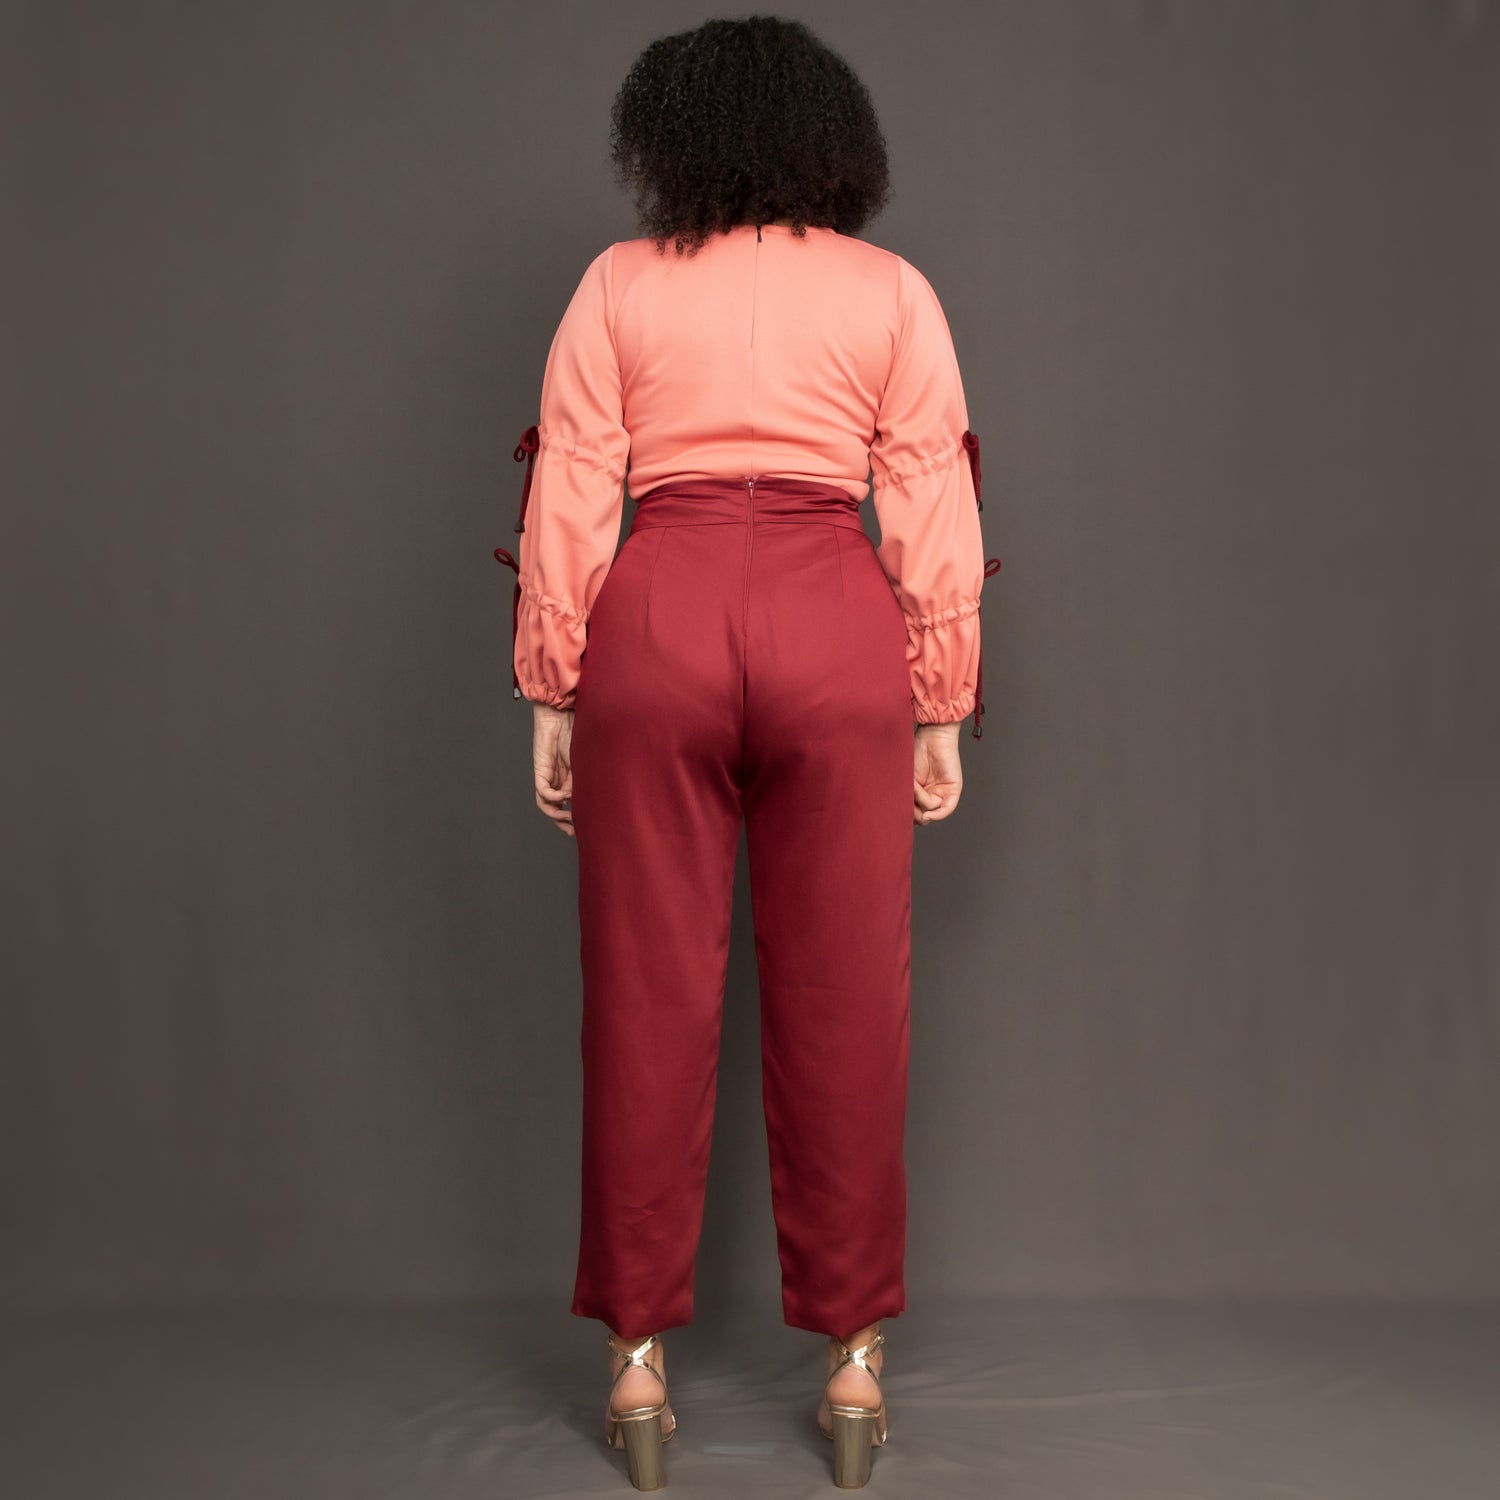 Model wearing high waist burgundy trousers and salmon pink long sleeve top by Kim Dave